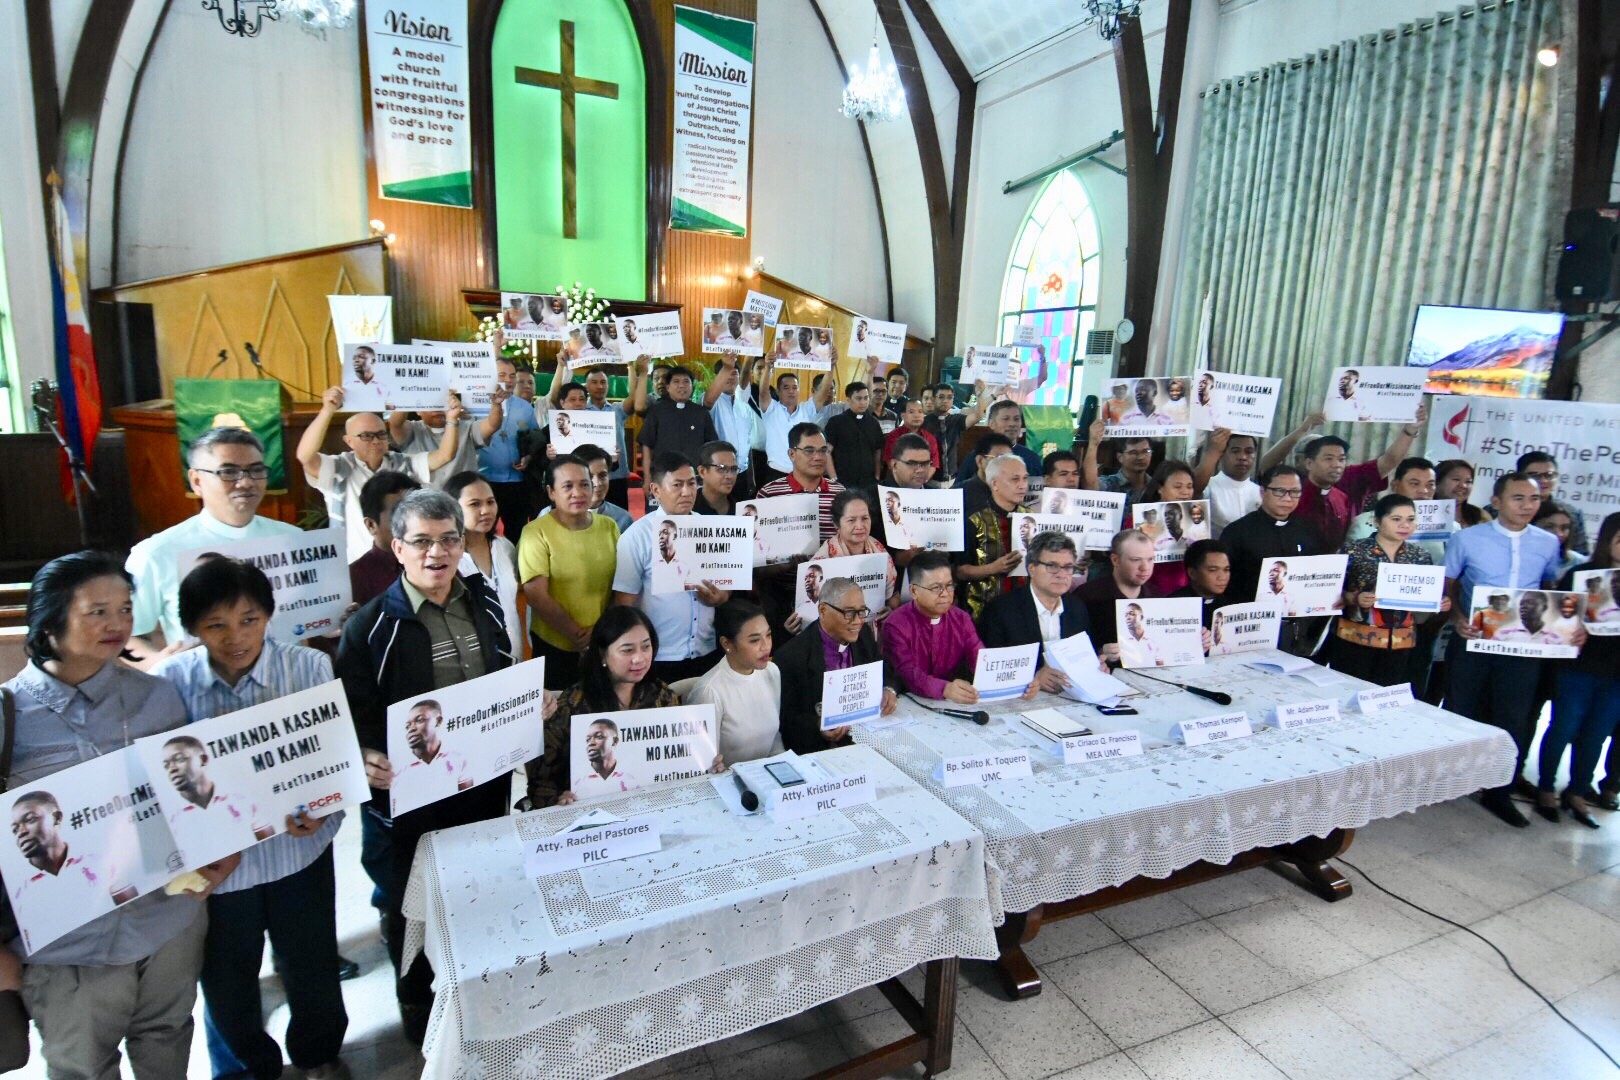 'LET THEM LEAVE.' Leaders and members of the United Methodist Church in a press conference on July 2, 2018, appeal for the release of 3 Methodist missionaries who were detained back then. Photo by Angie de Silva/Rappler 